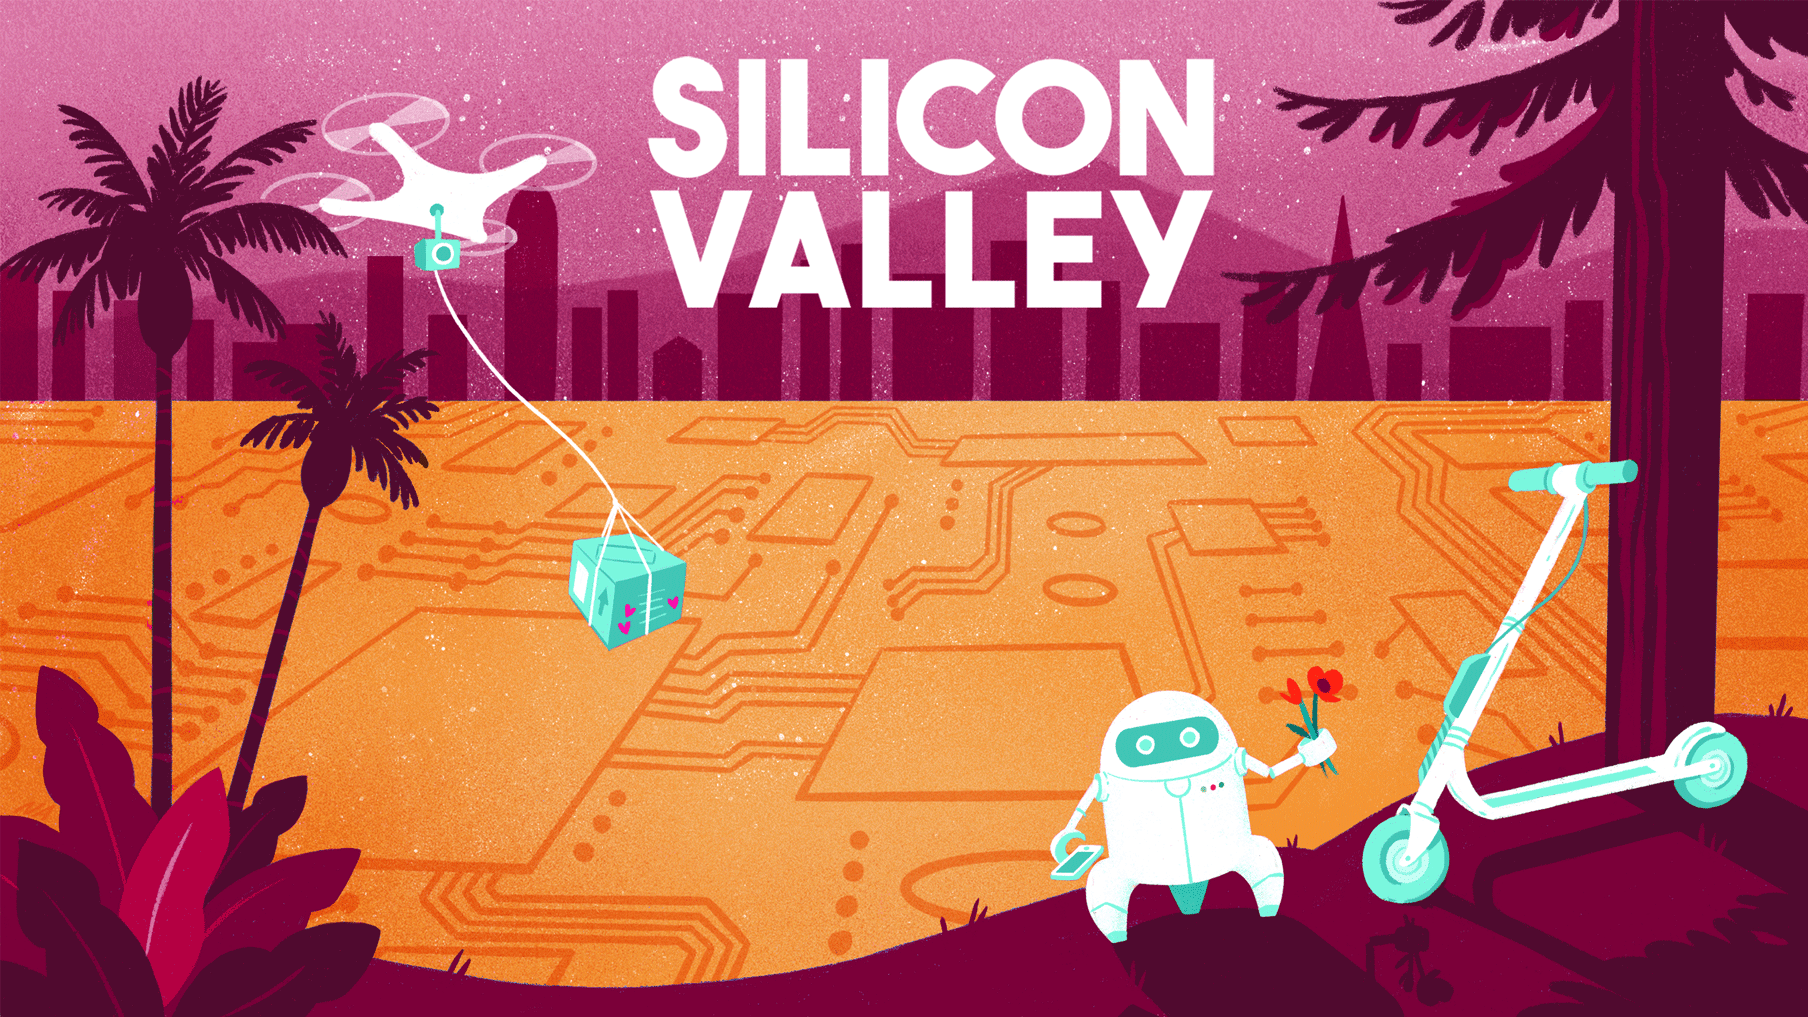 Animation of Silicon Valley in the distance, with an electric scooter, a drone, and a small robot in the foreground.